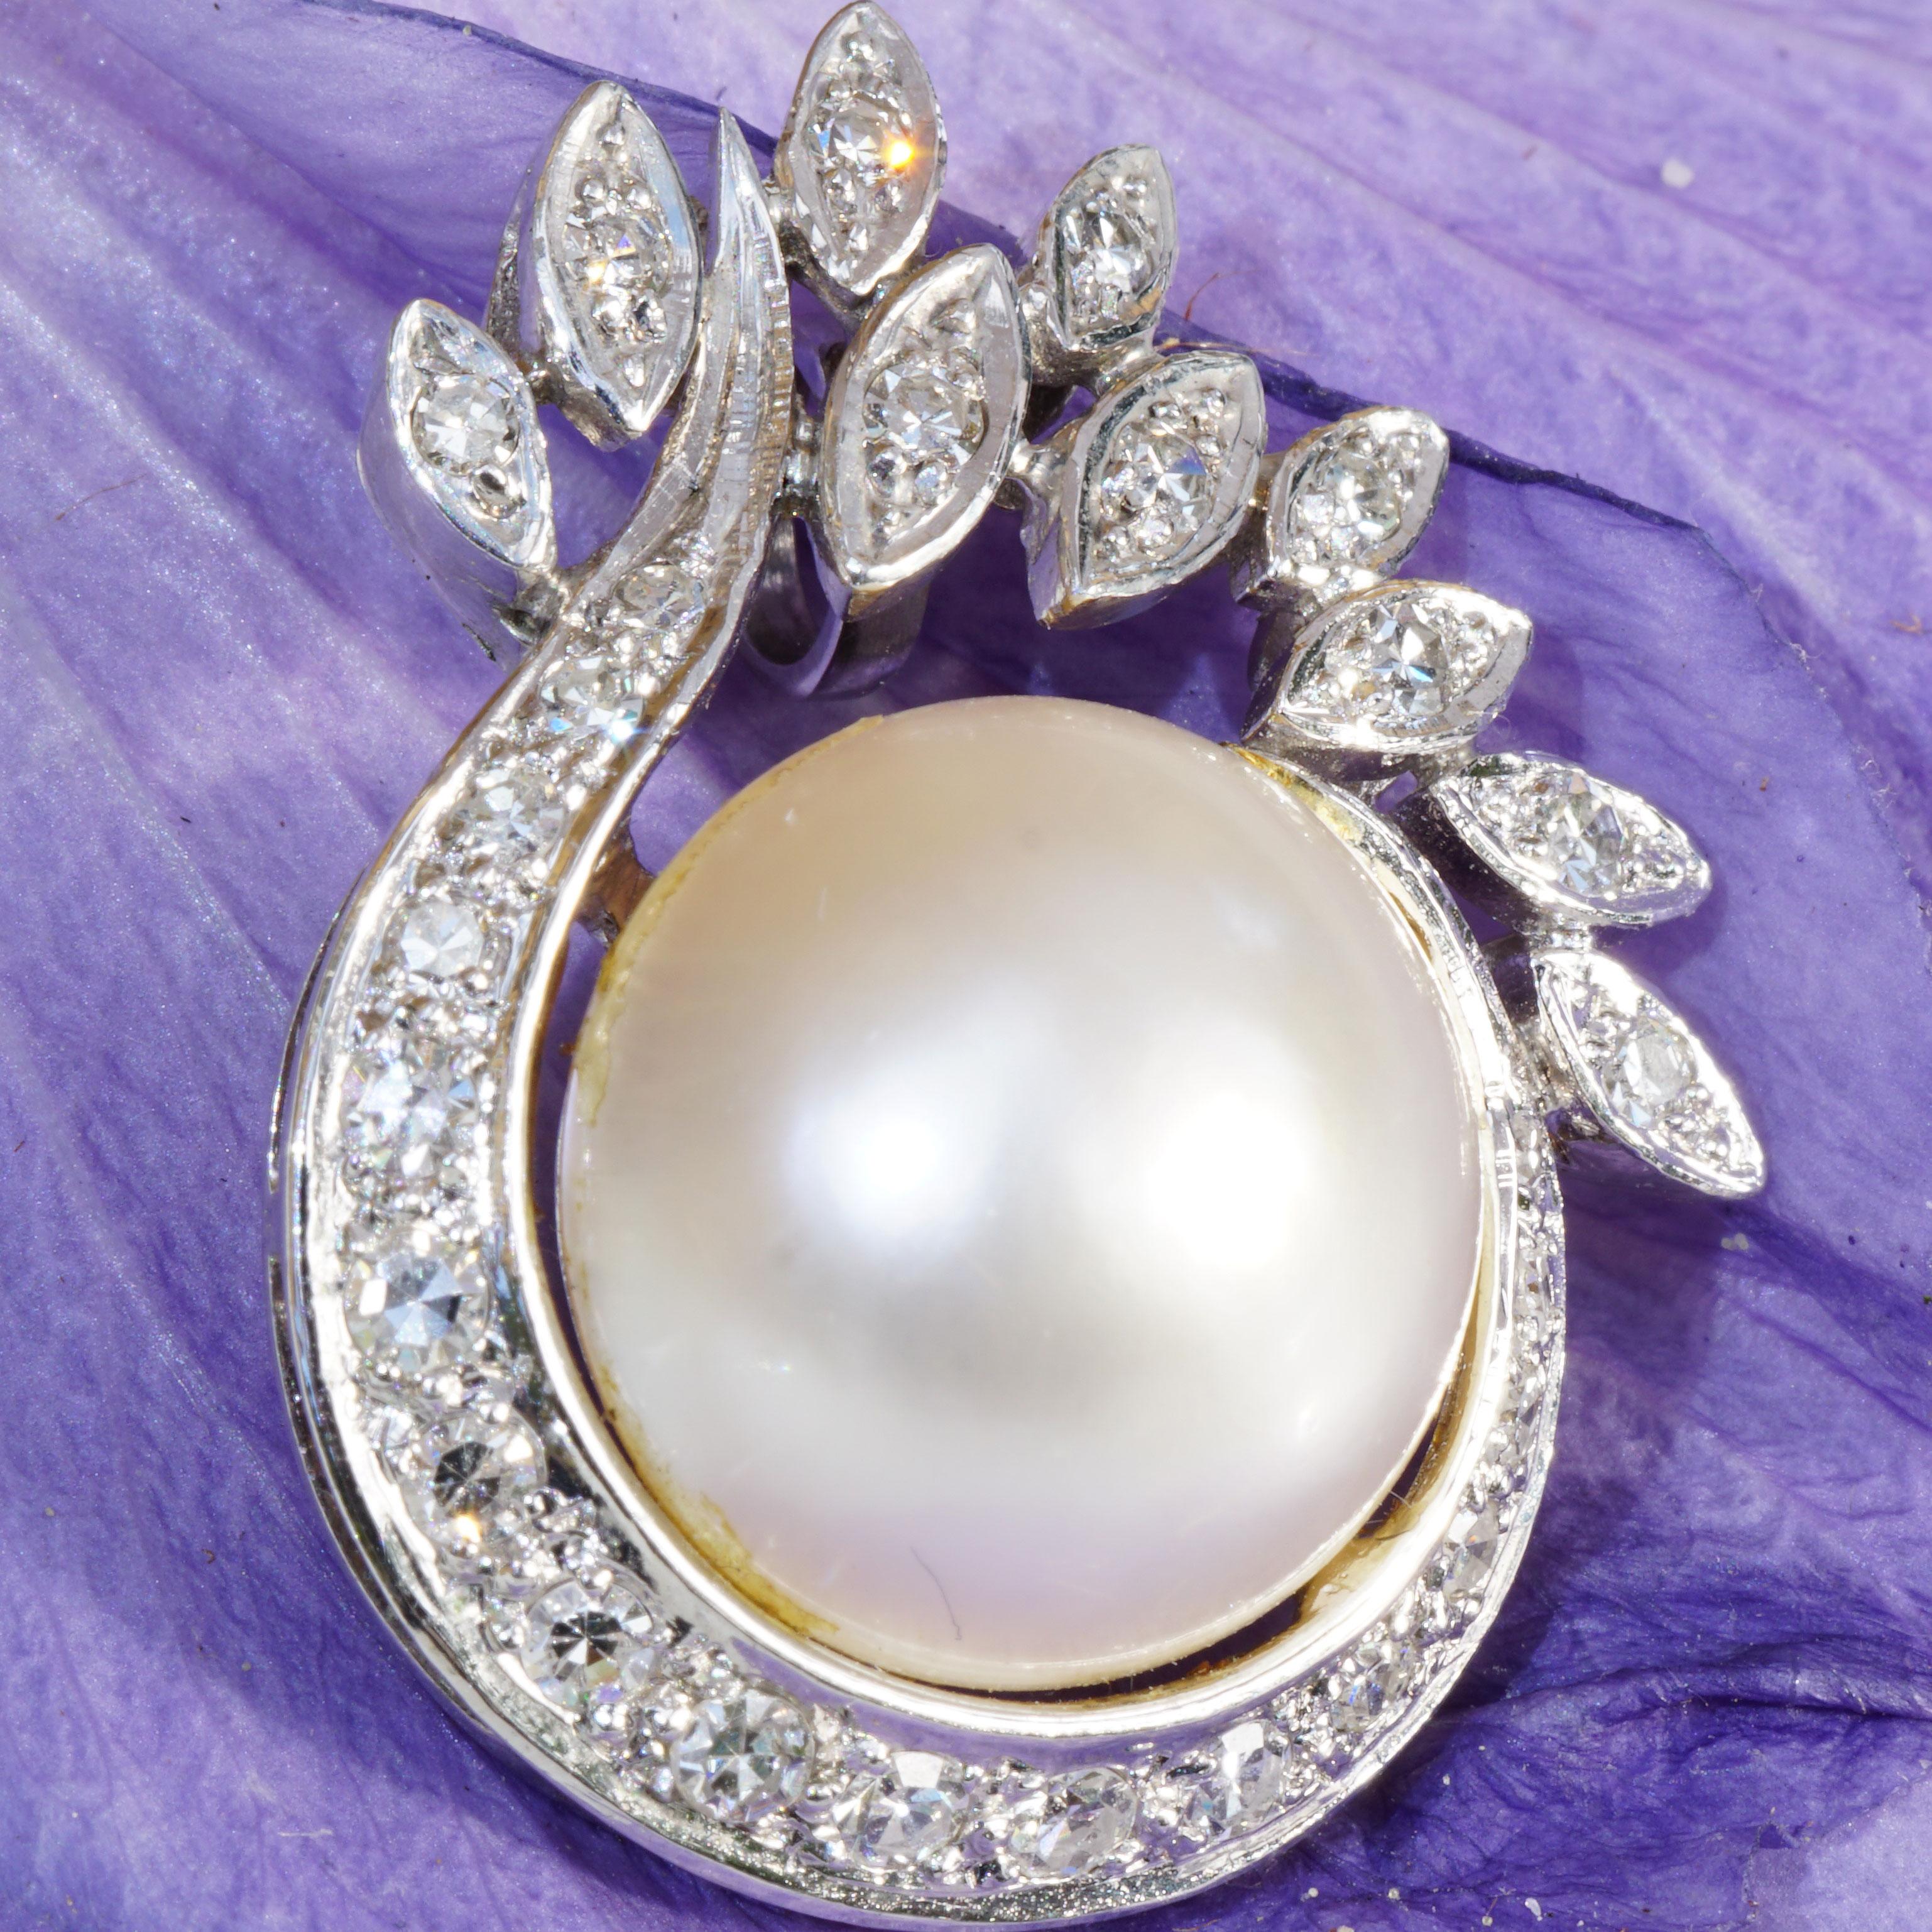 Brilliant Cut Mabe Pearl Brilliant Pendant White Gold 0.60 ct TW VS 27 x 22 mm large Eyelet For Sale